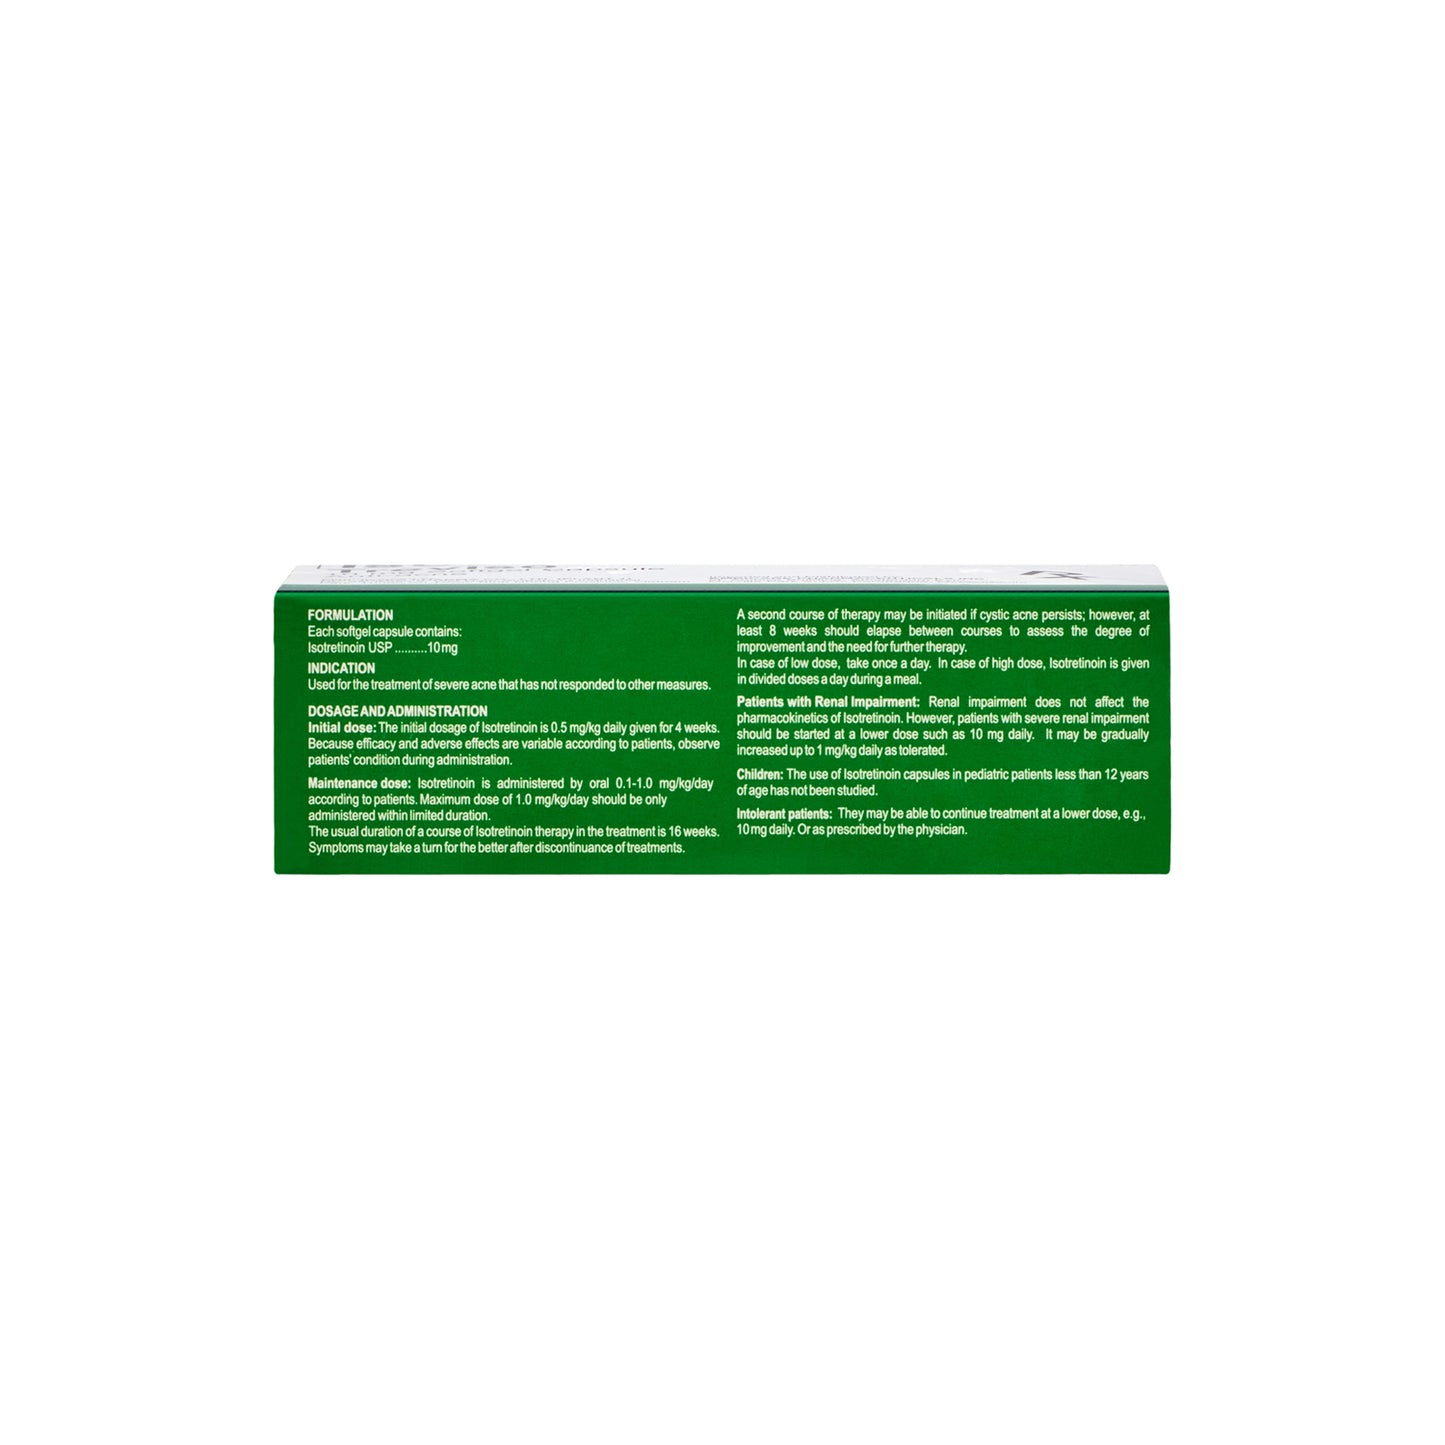 [Rx] TREVISO Isotretinoin 10mg (Box of 30s)